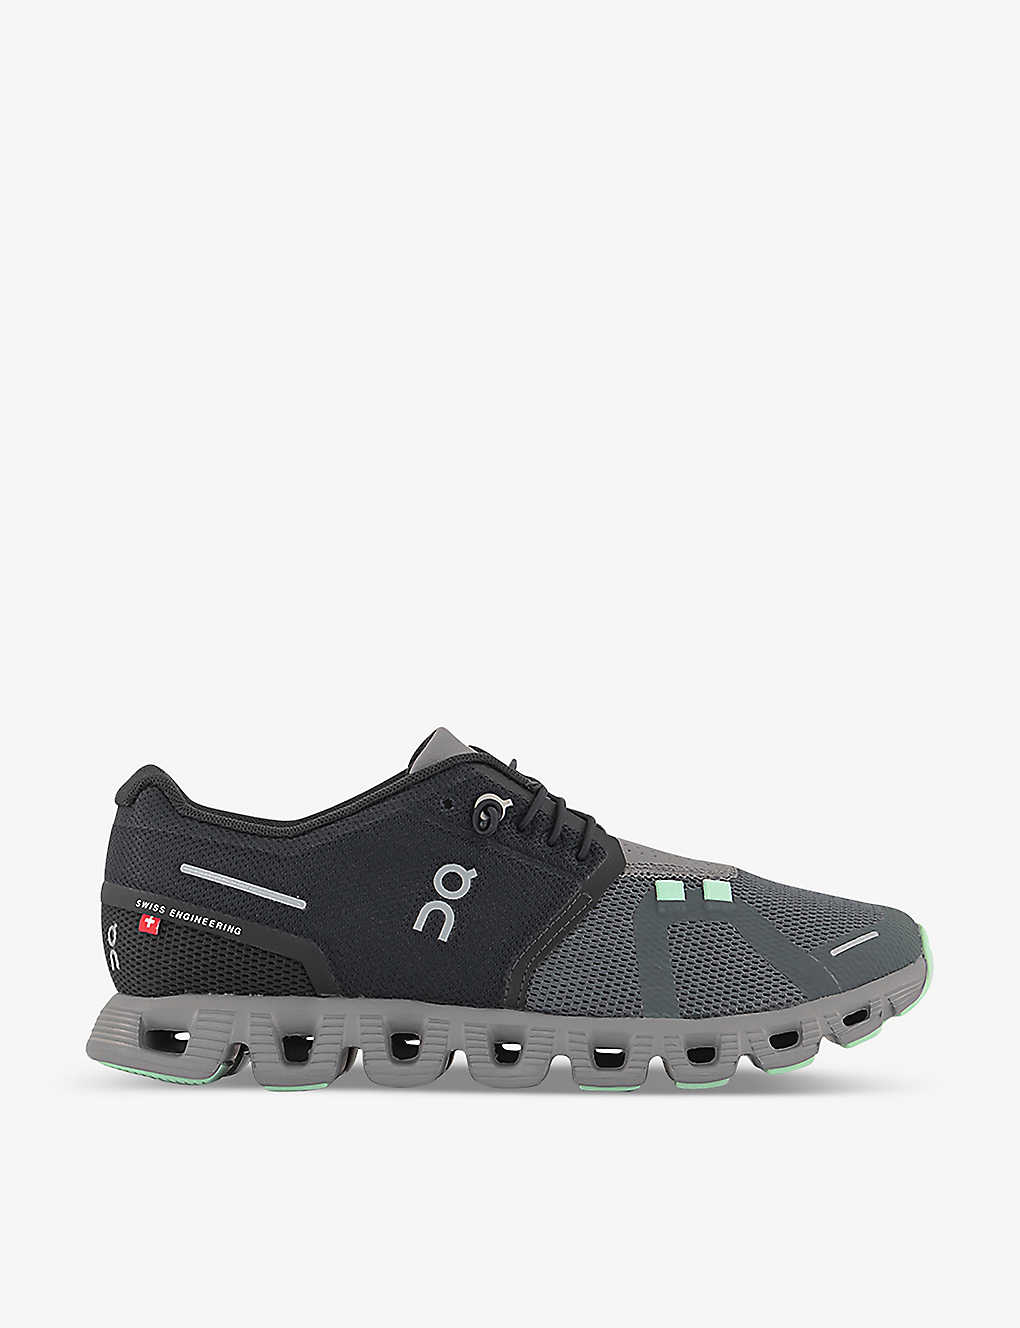 On-running Womens Black Lead F Cloud 5 Mesh Low-top Trainers